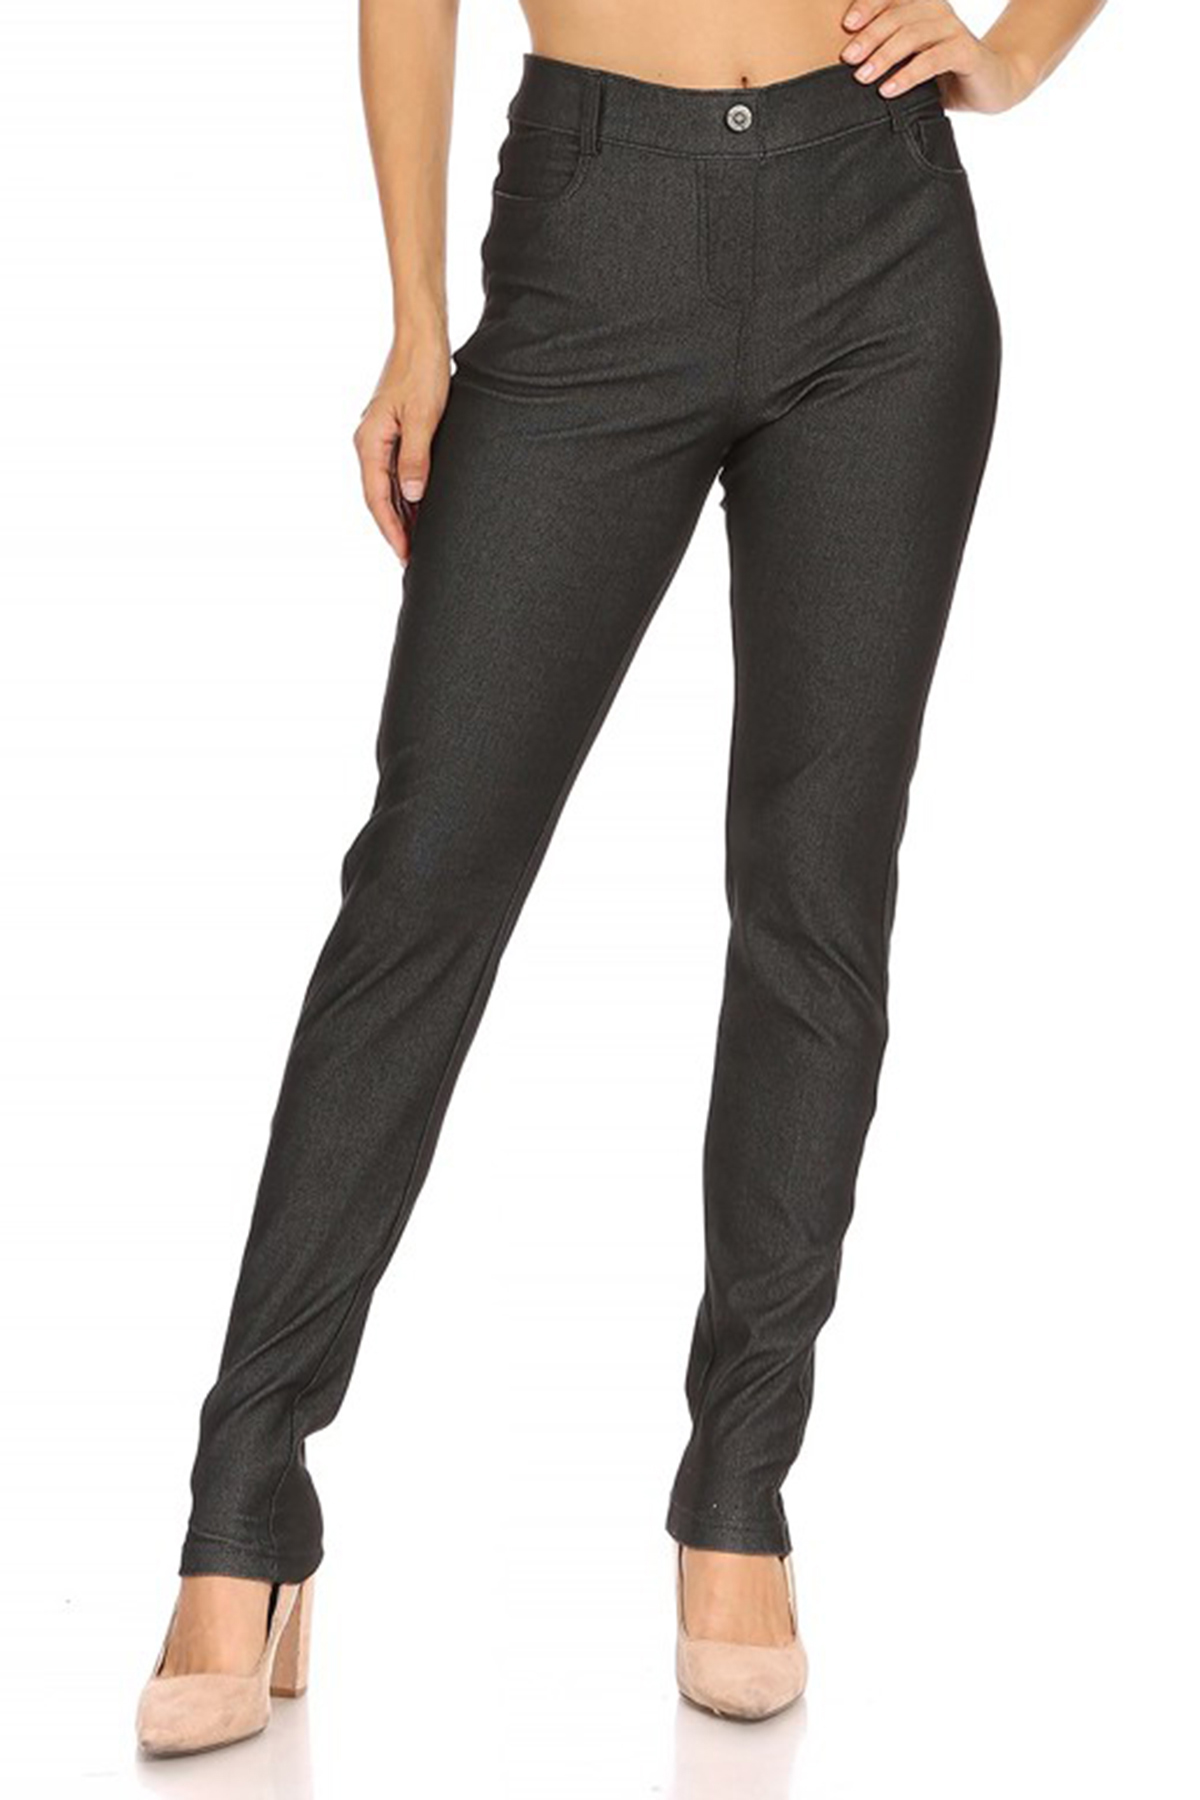 Moa Collection Women's Casual Comfy Slim Pocket Jeggings with Button 